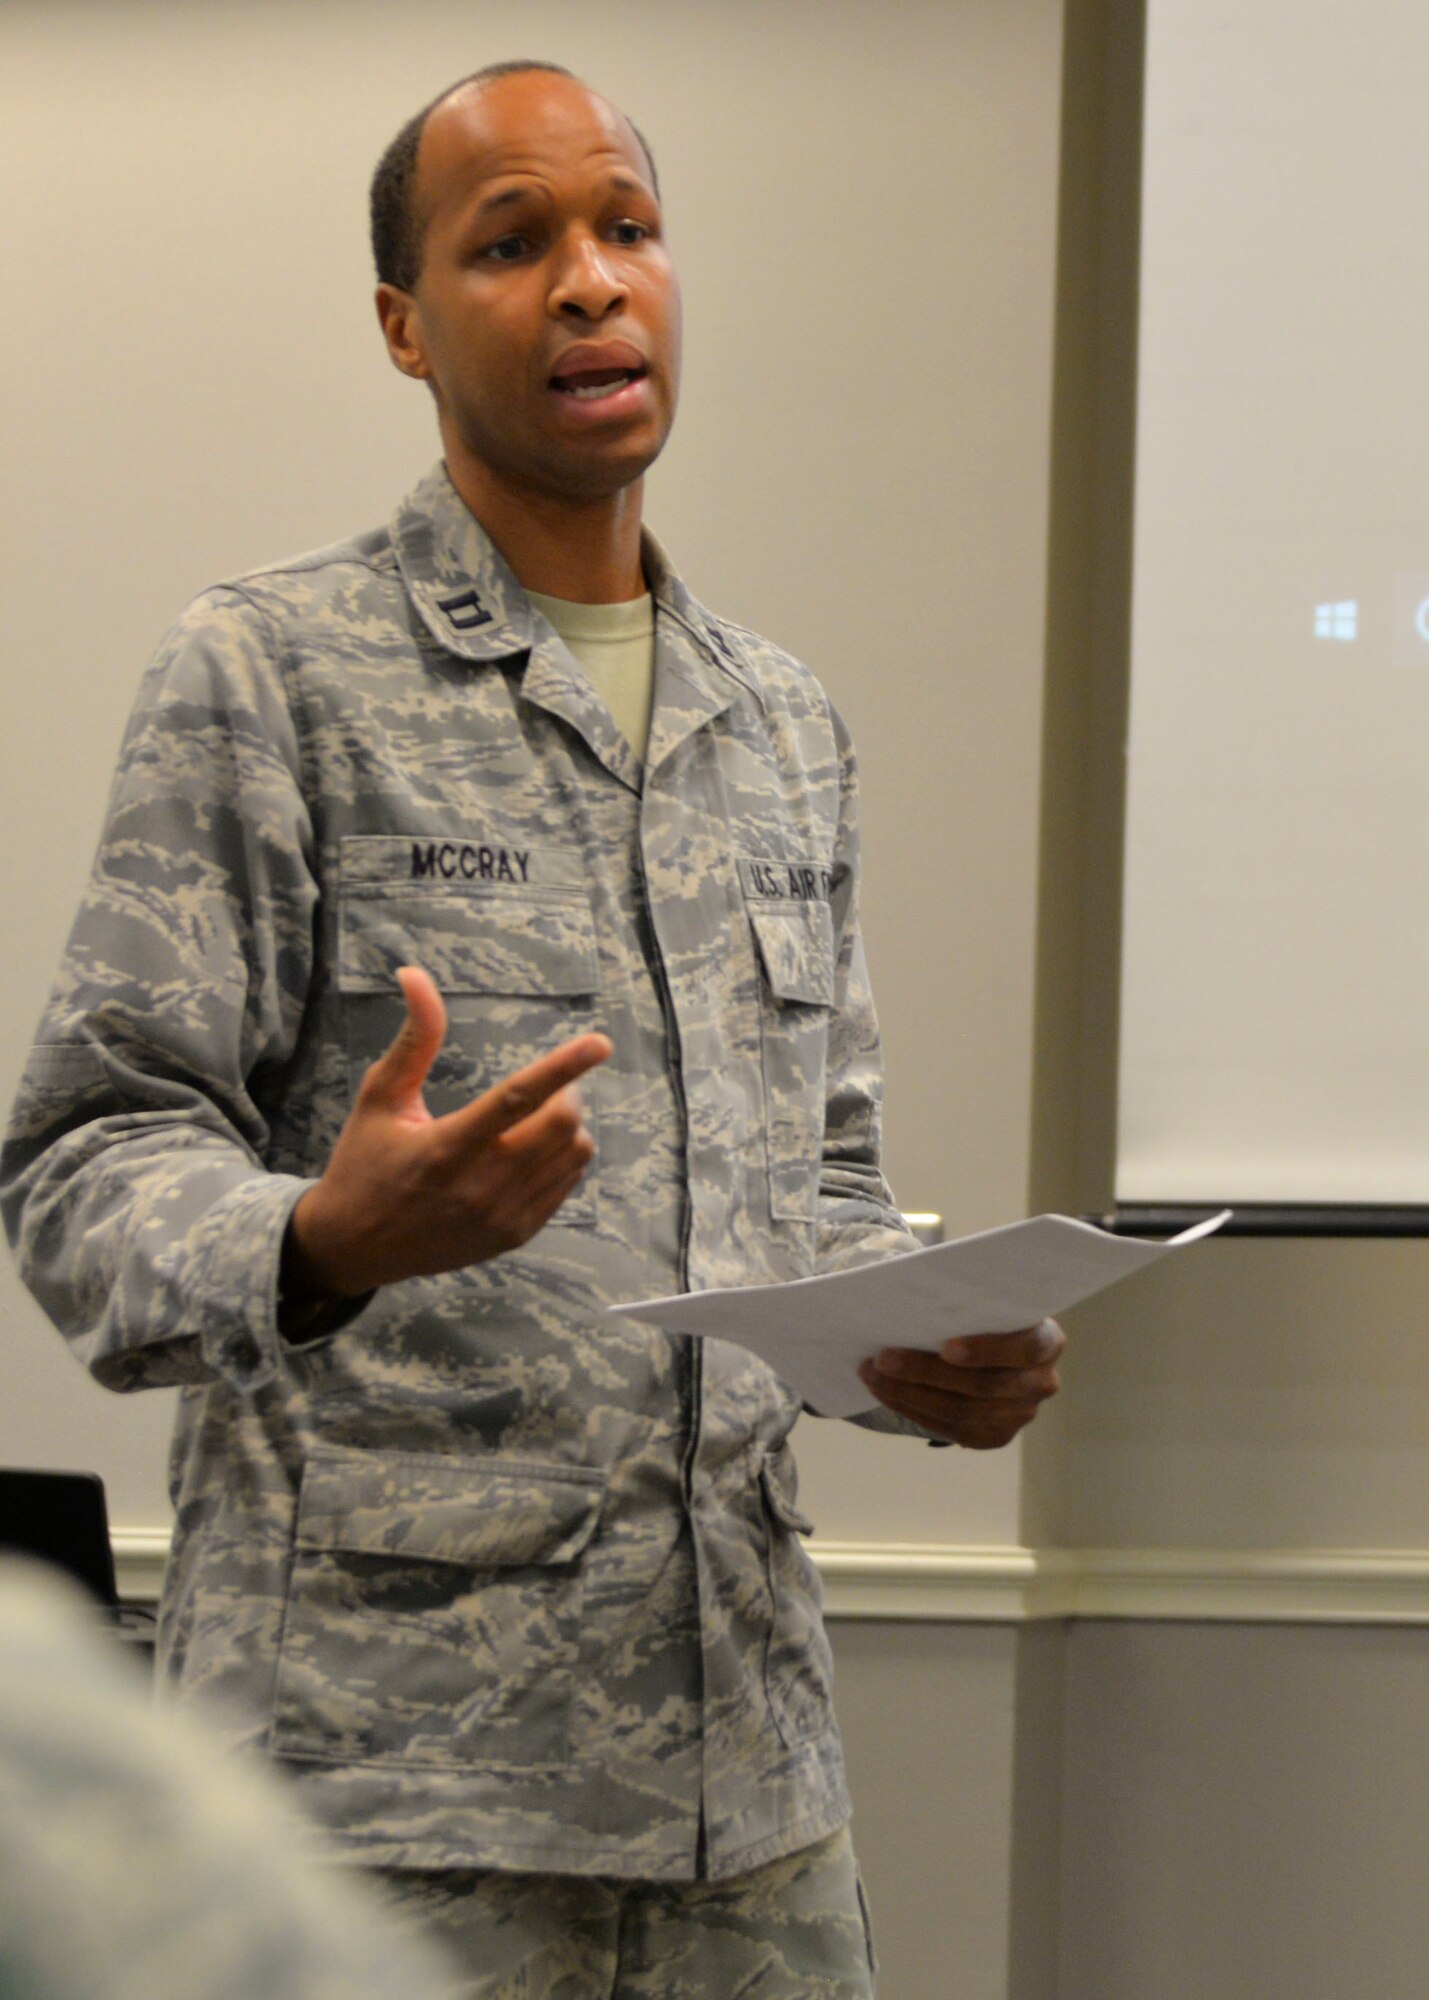 U.S. Air Force Capt. Jeremy McCray, 136th Medical Group Medical Service Corps officer, discusses the benefits of using a digital faxing system to improve speed and security for his unit during the wing’s Spark Tank competition Oct. 20, 2018.  Through the Spark Tank program, Airmen across the Air Force compete and pitch their ideas much like an entrepreneur would make a pitch to a venture capital firm.  (U.S. Air National Guard photo by Senior Airman Bryan Swink)